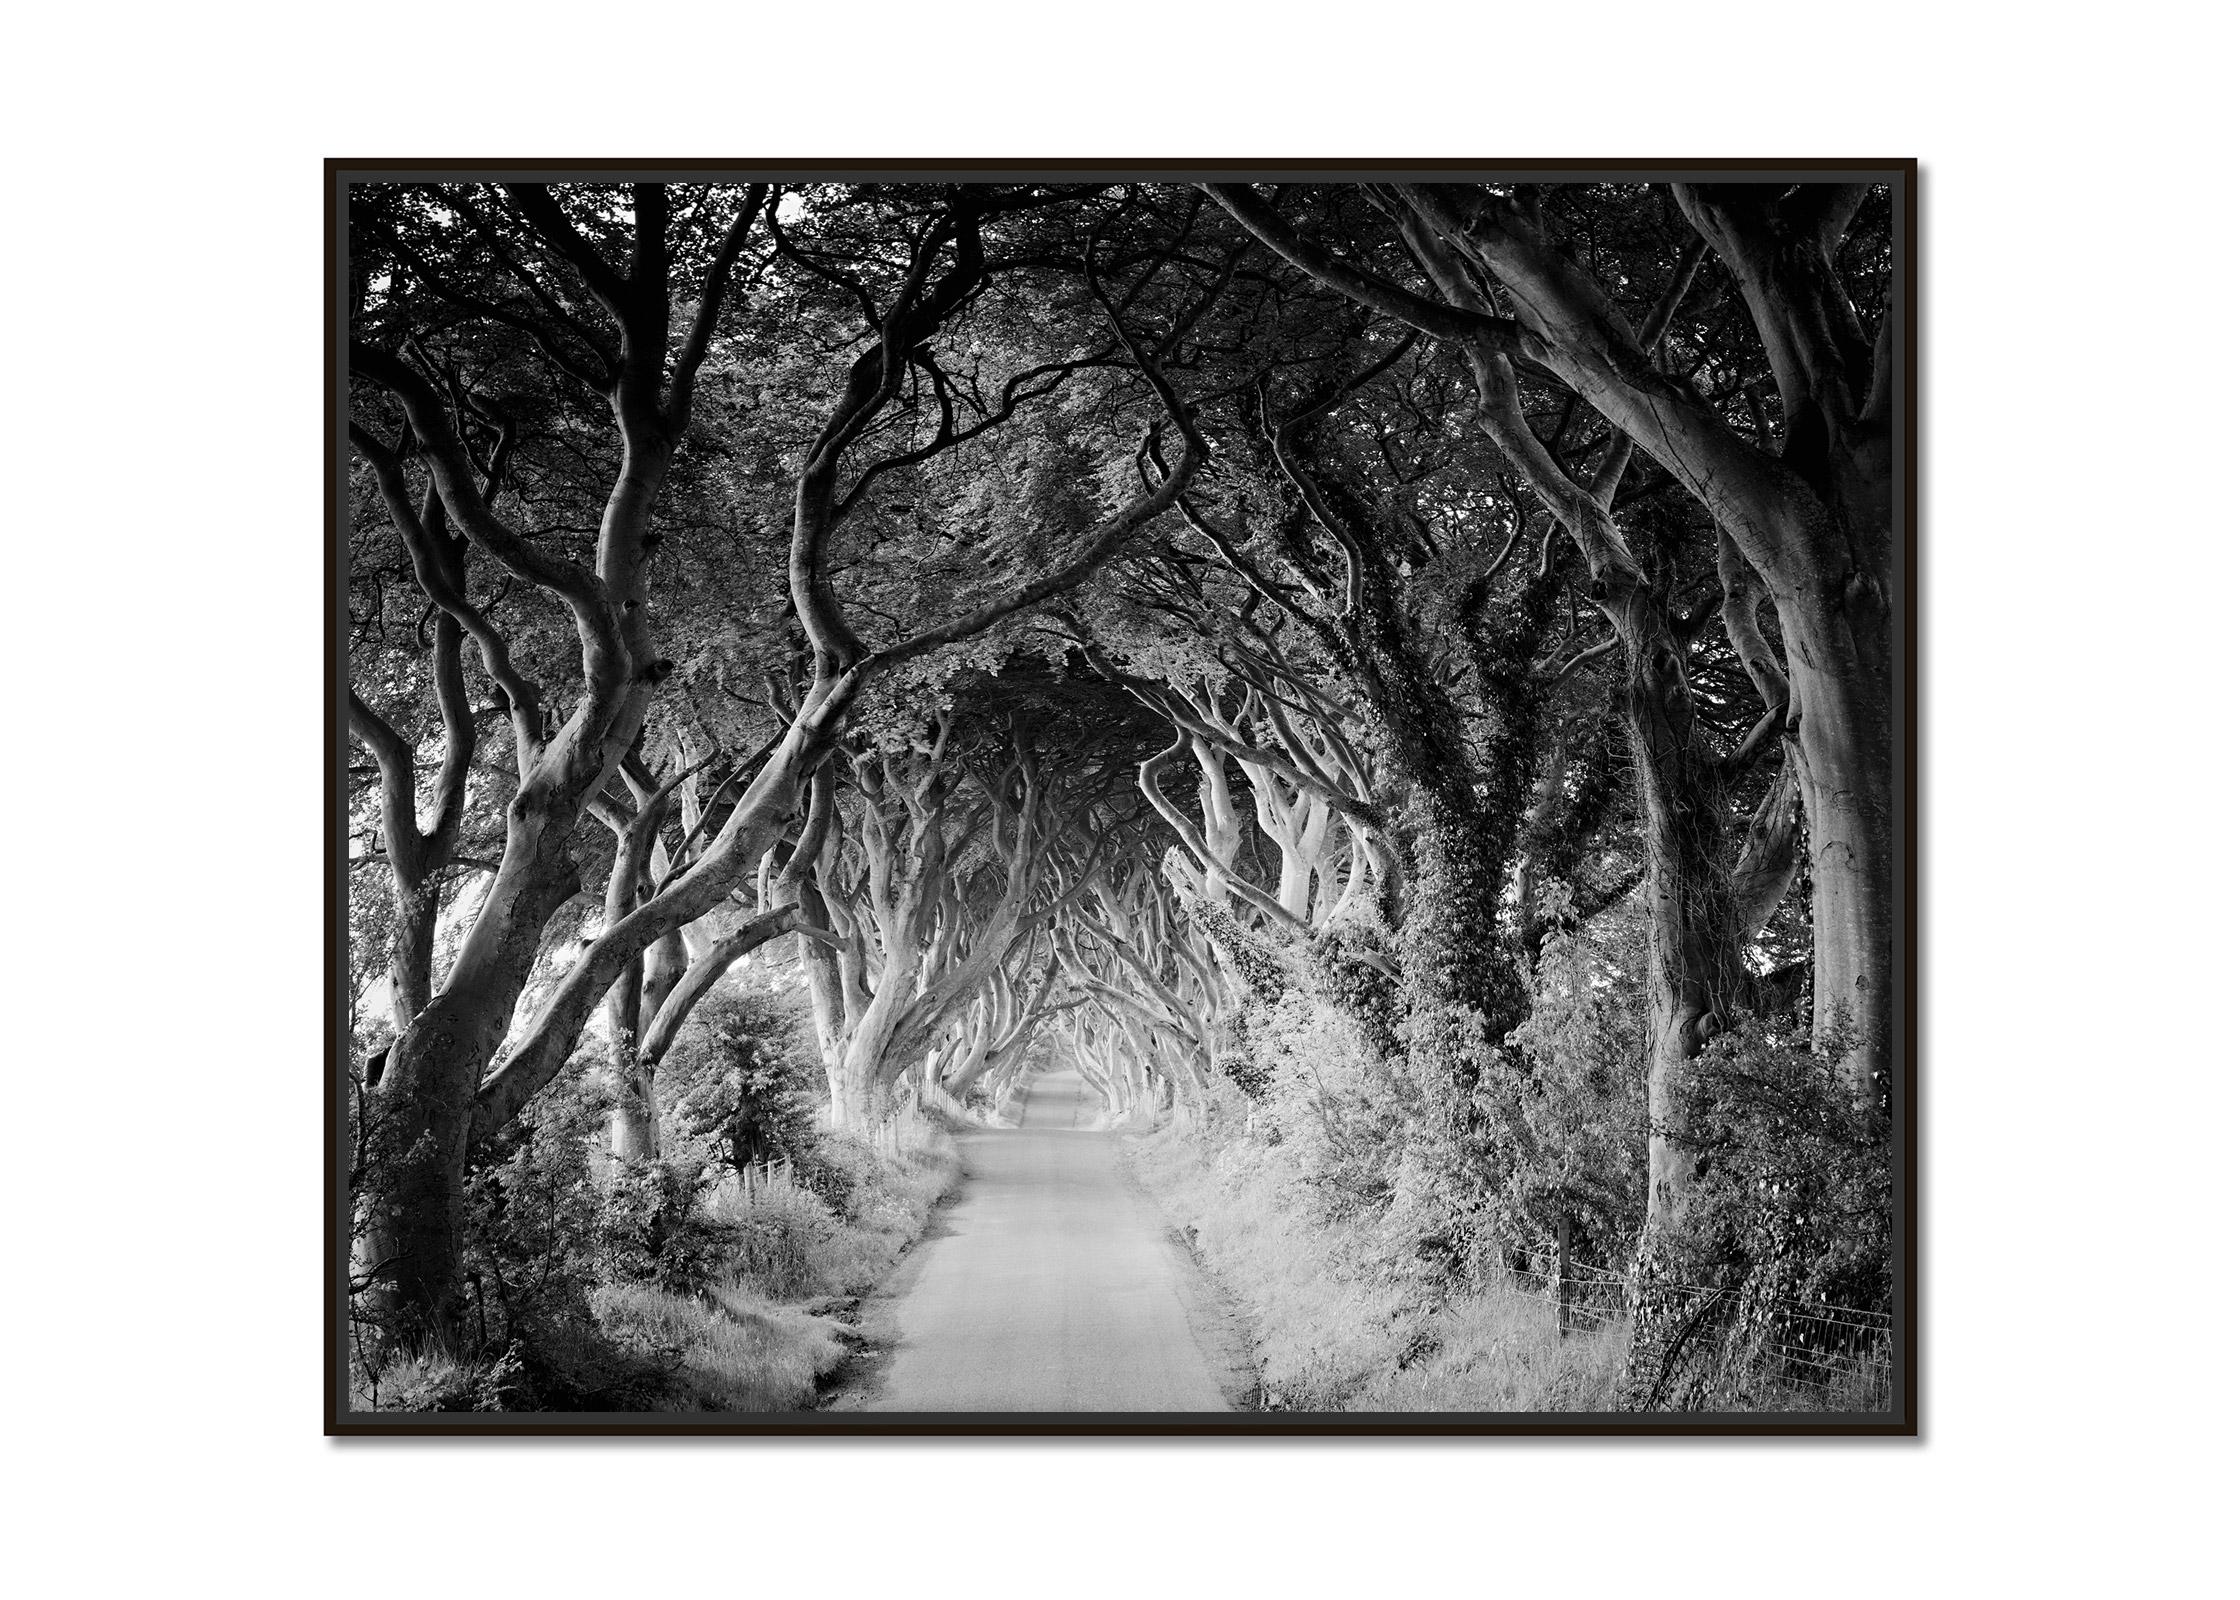 Dark Hedges, Beech, old Trees, black and white fine art landscape photography - Photograph by Gerald Berghammer